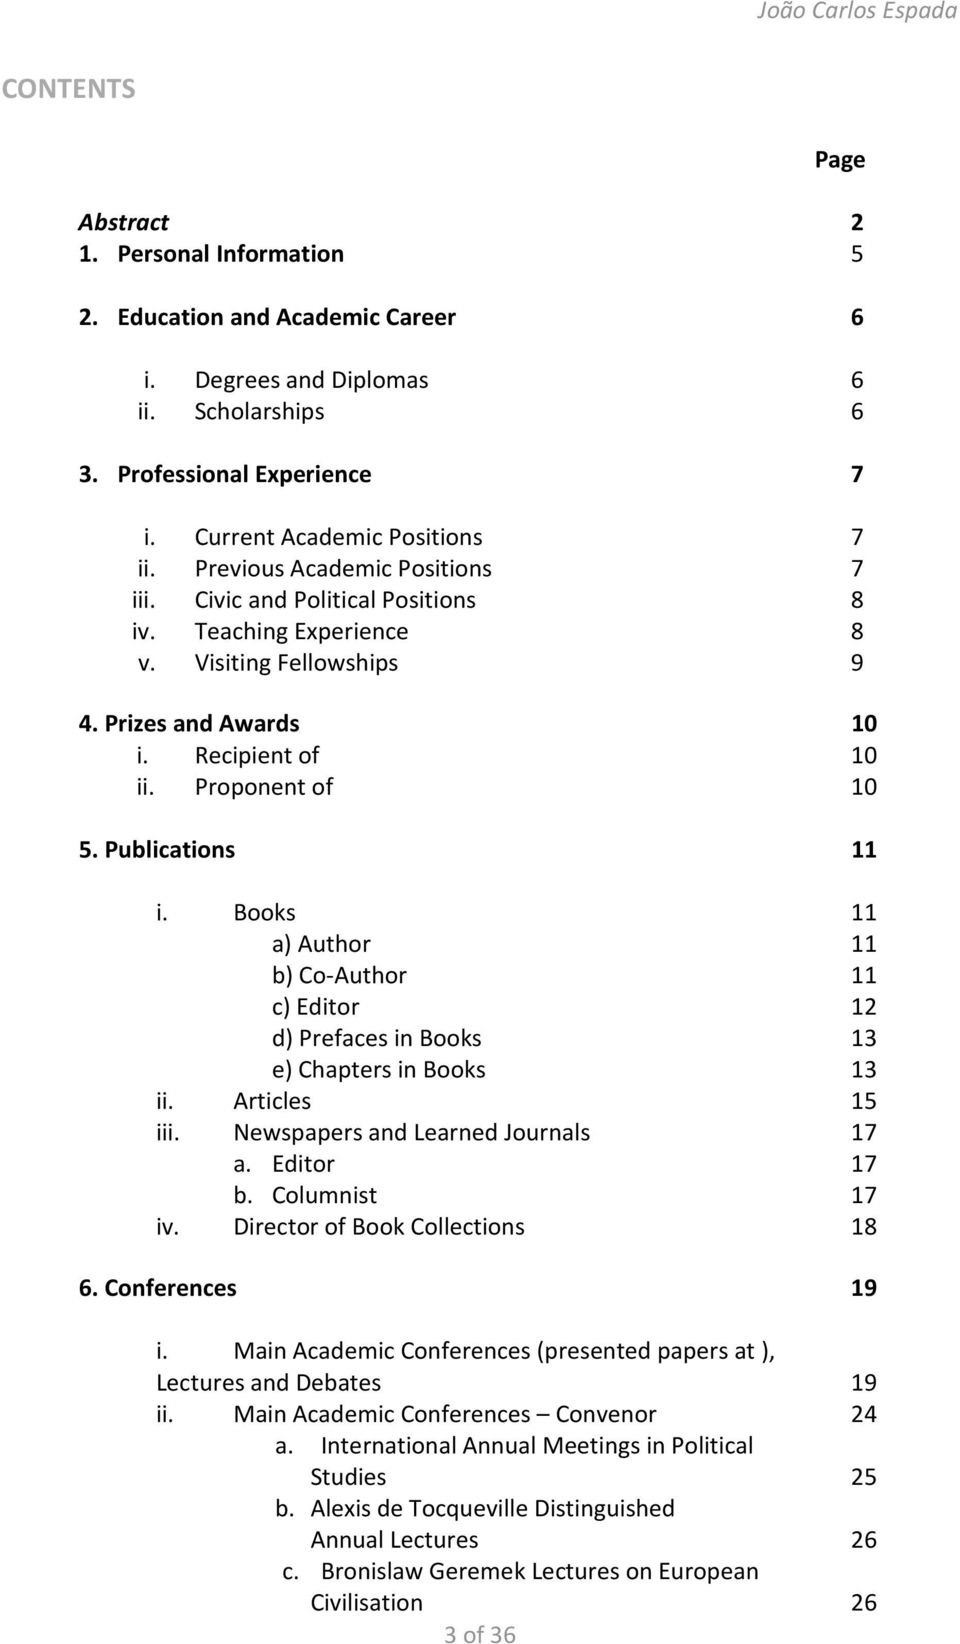 Publications 11 i. Books 11 a) Author 11 b) Co-Author 11 c) Editor 12 d) Prefaces in Books 13 e) Chapters in Books 13 ii. Articles 15 iii. Newspapers and Learned Journals 17 a. Editor 17 b.